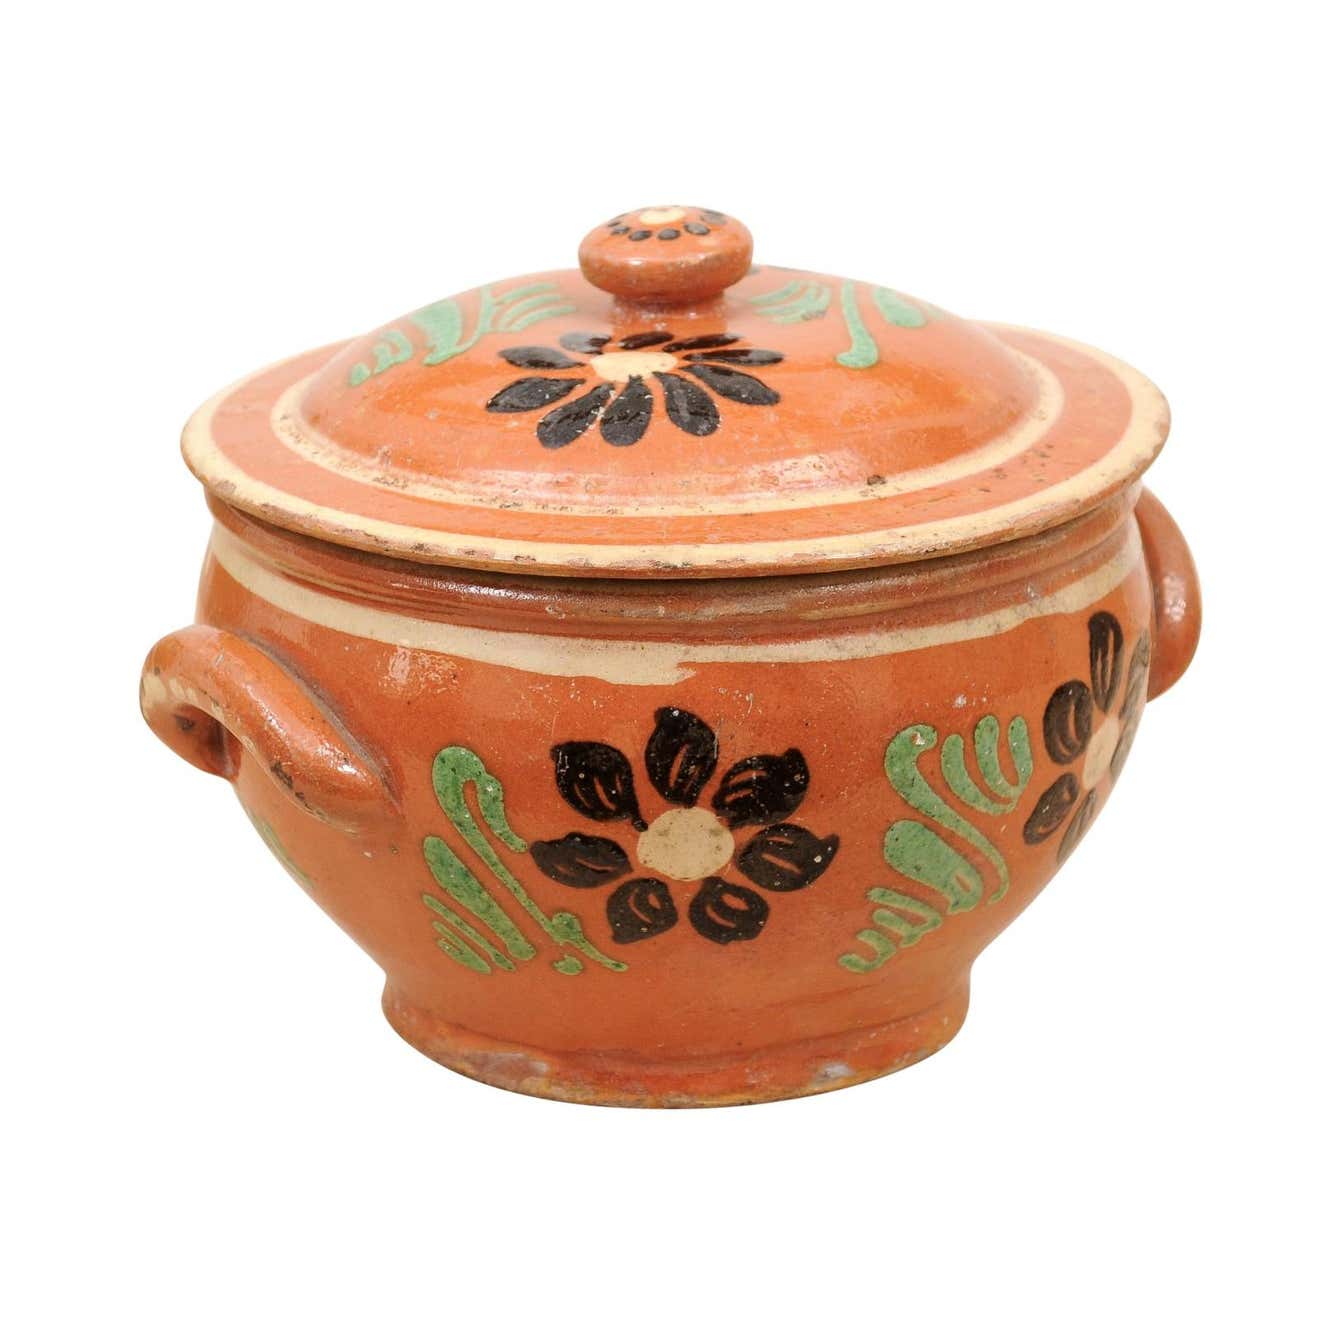 Rustic French 19th Century Glazed Terracotta Covered Baking Dish with Flowers